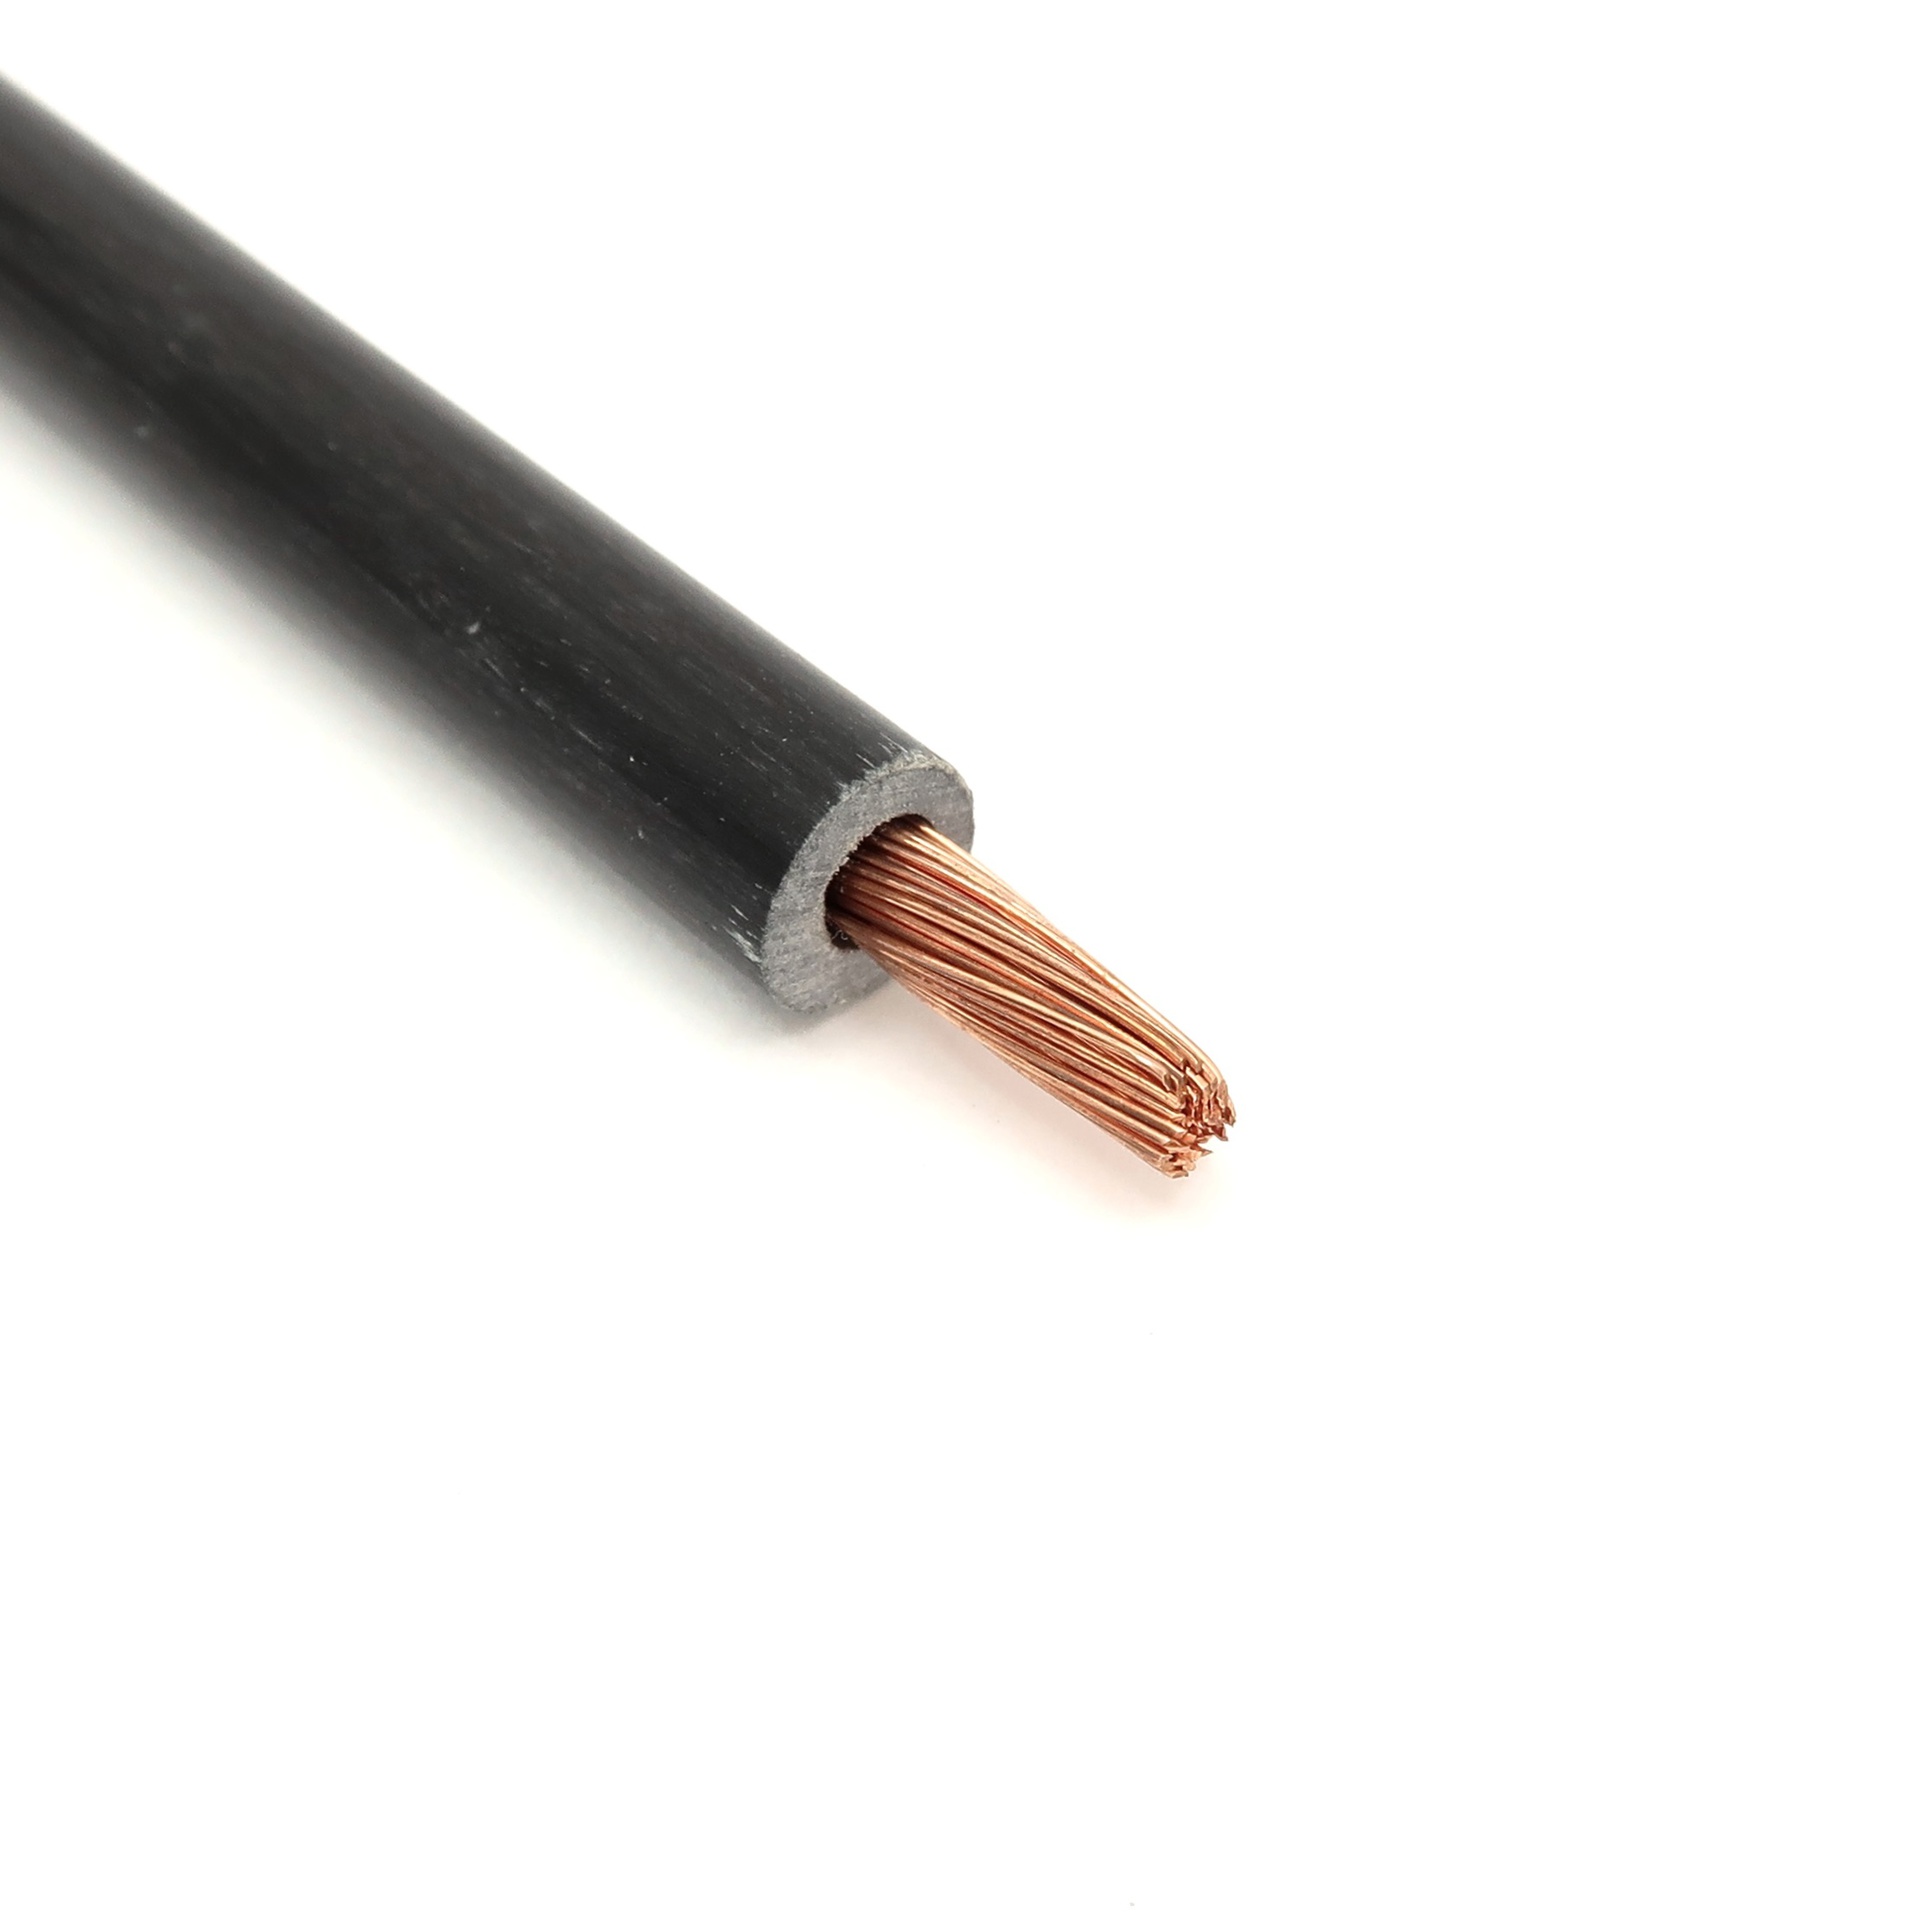 RT-516-964 .3125 inch OD Round Hollow Tube can take 10 AWG Bare Solid Wire or 12 AWG Bare Tightly Wound Stranded Wire - Max-Gain Systems, Inc.